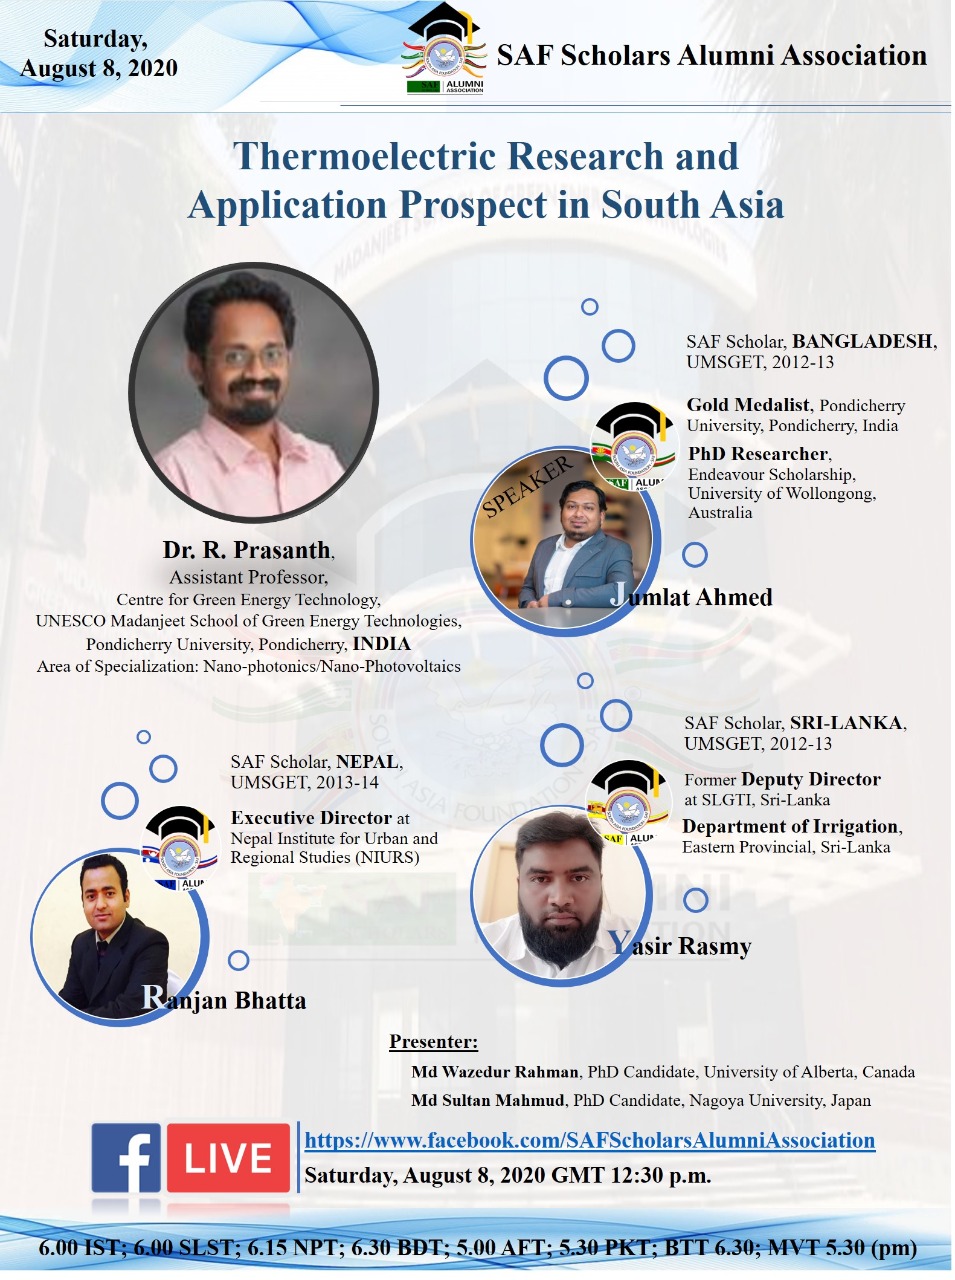 Thermoelectric Research and Application Prospect in South Asia